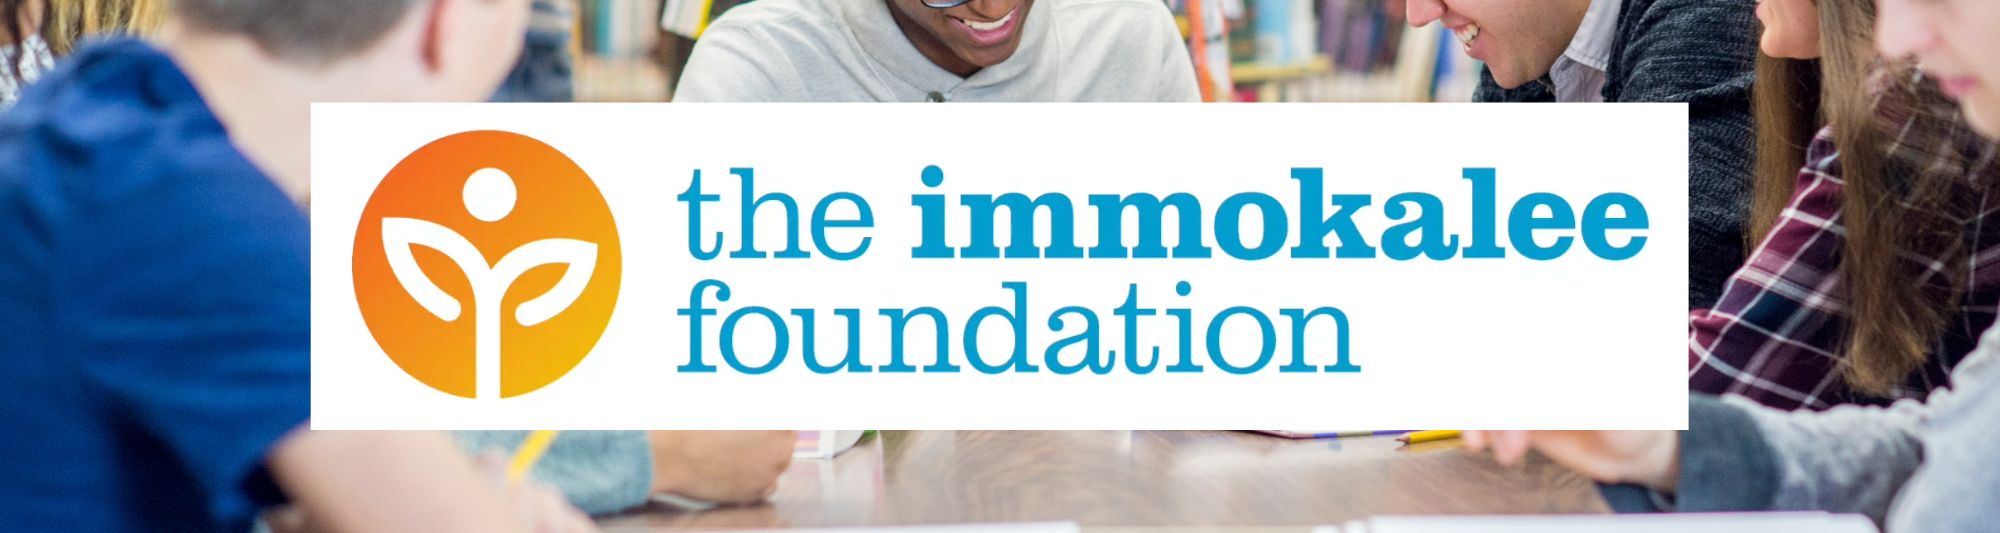 Wordpress banner photo for the Immokalee Foundation blog